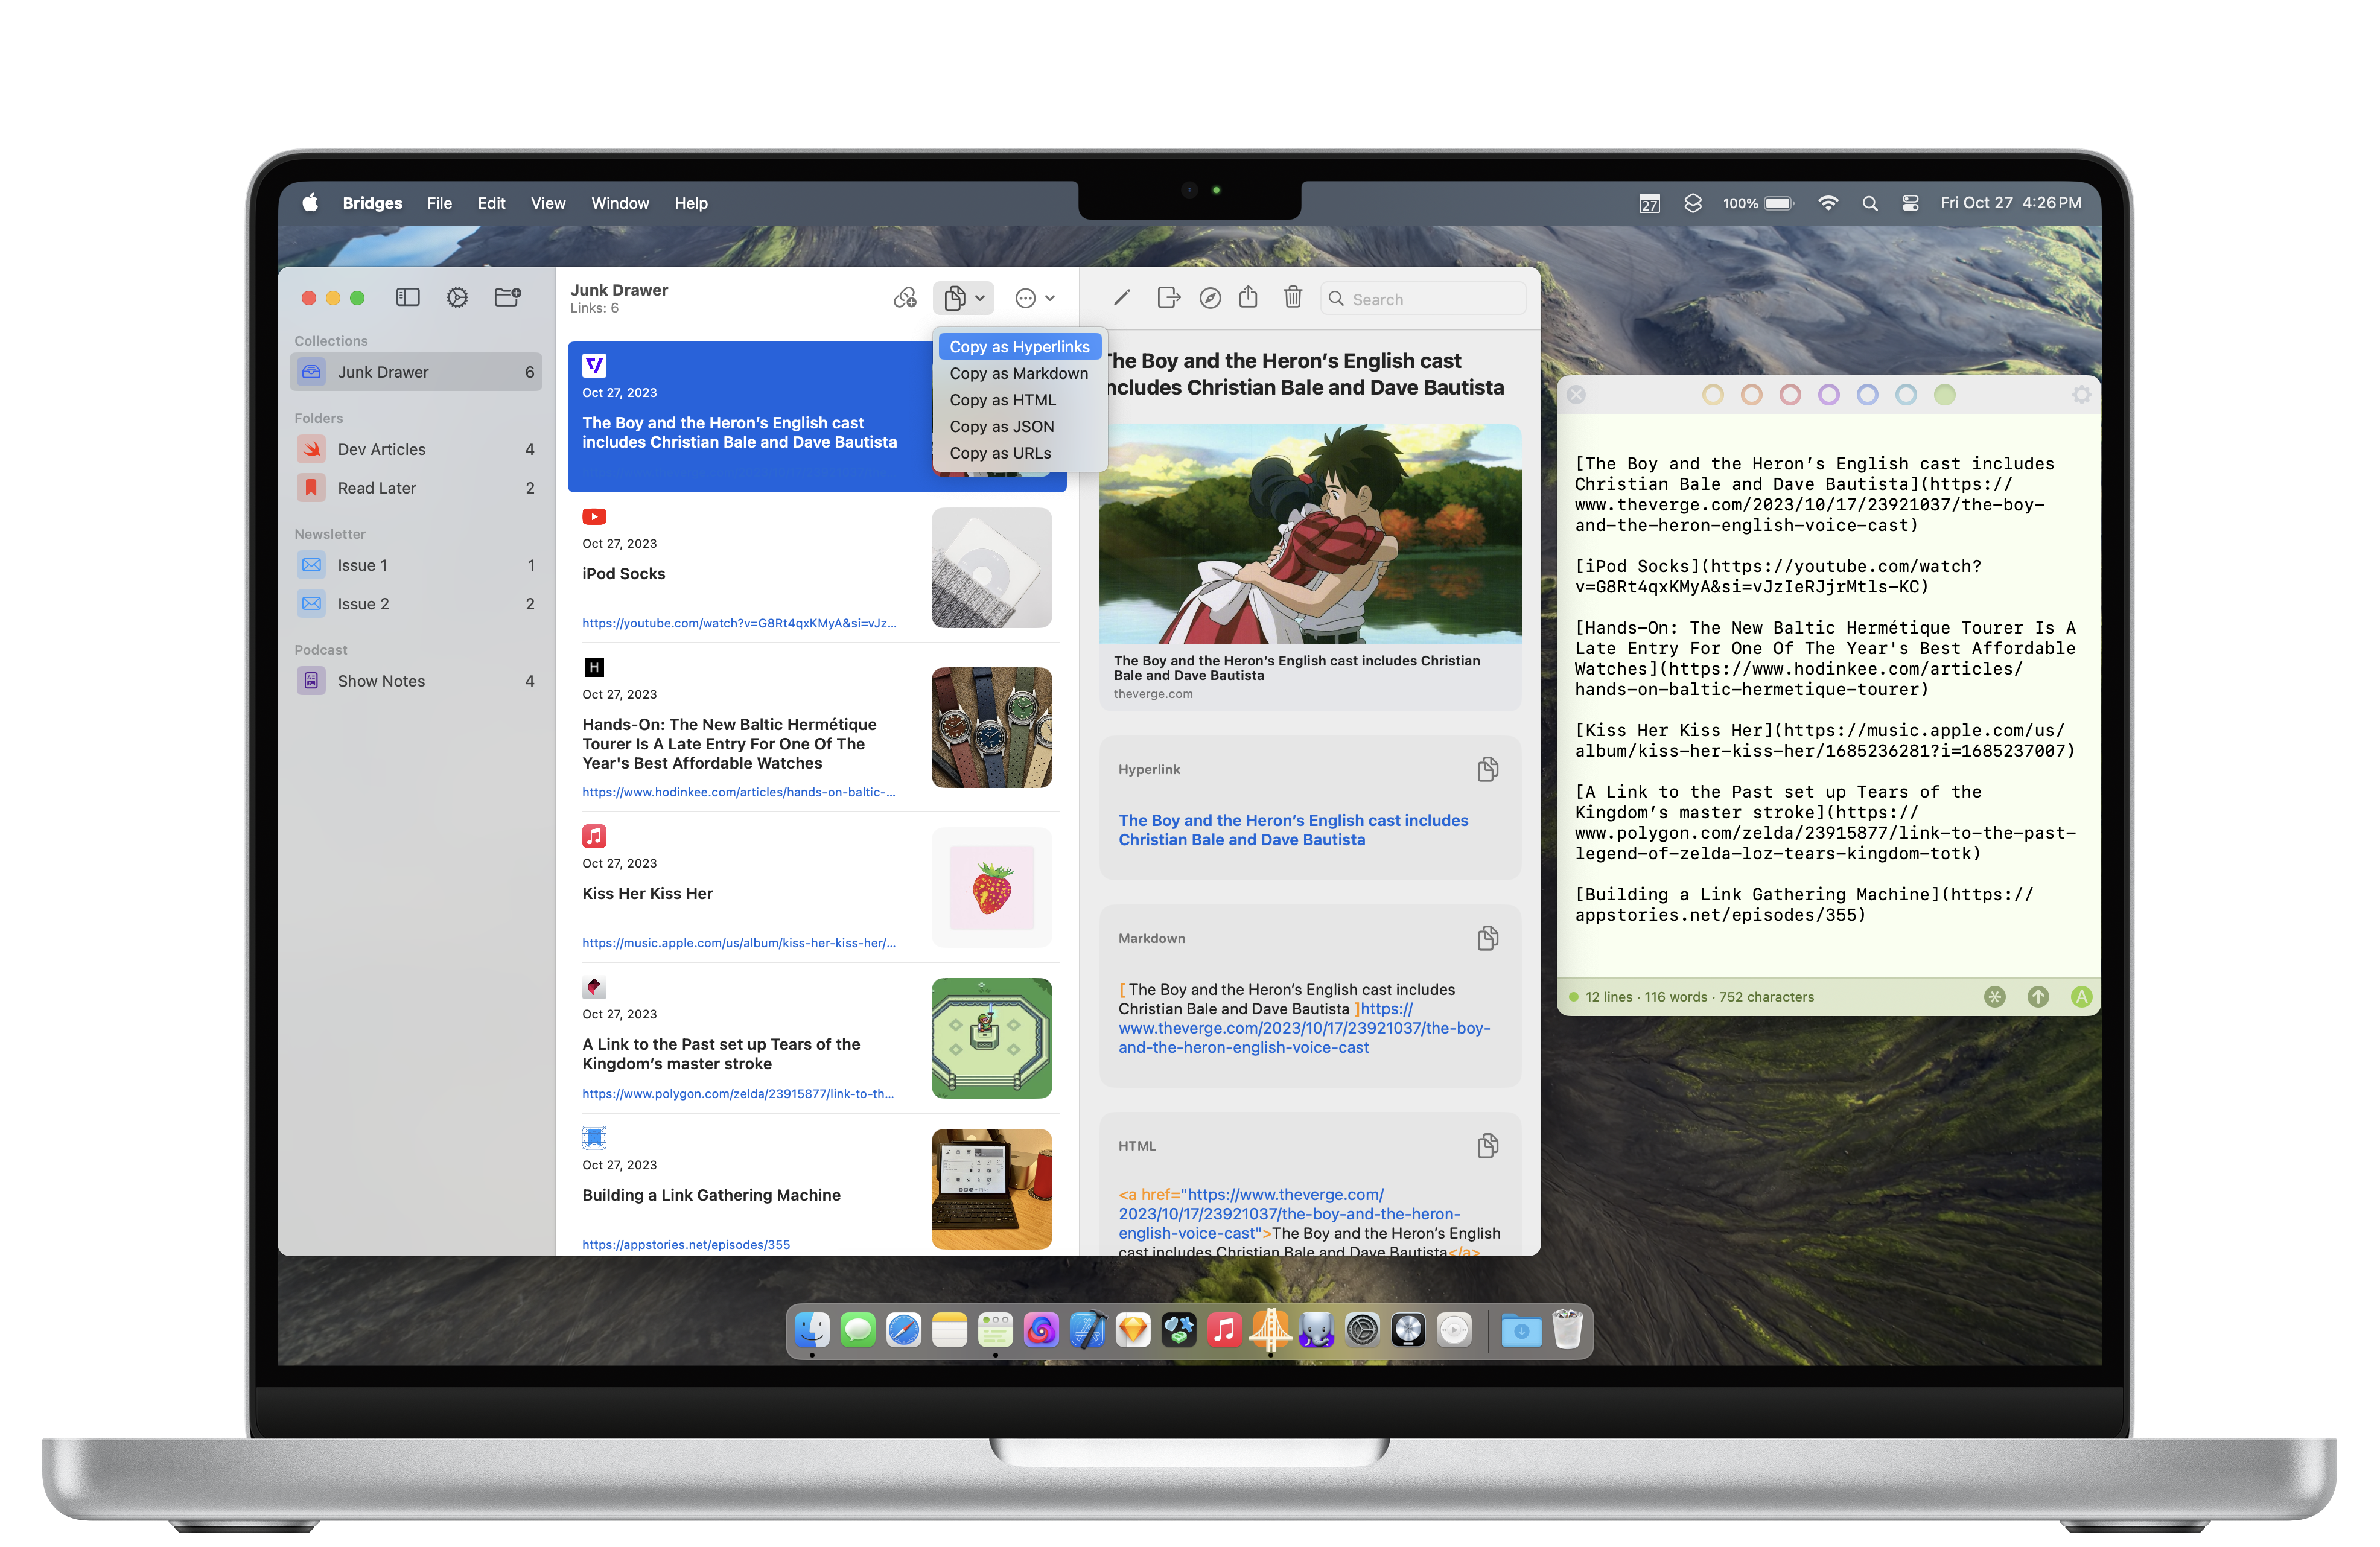 A Macbook Pro showing my link saving app Bridges. Showing how you can use the app to save links to a folder and copy all those links in different formats to the clipboard.